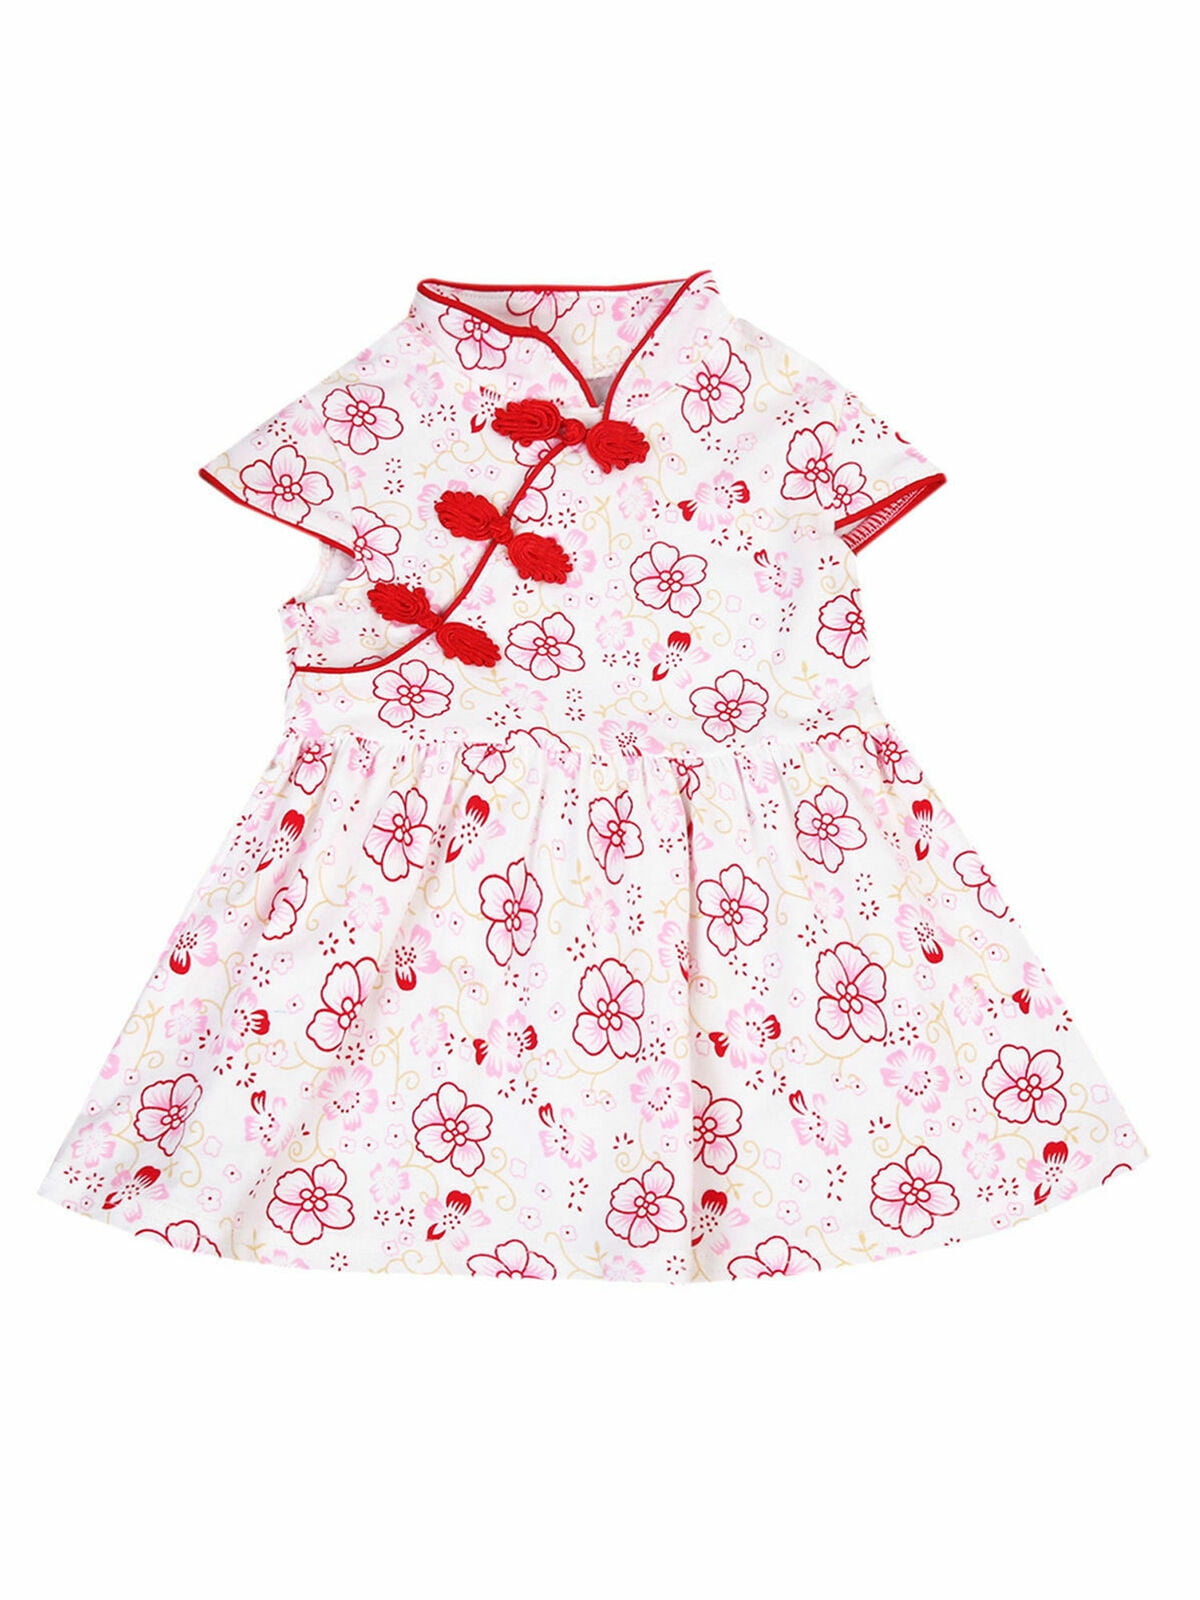 Baby Kids Girl Flower Cheongsa Chinese Style Romper Toddler Infant Outfits 0-24M 